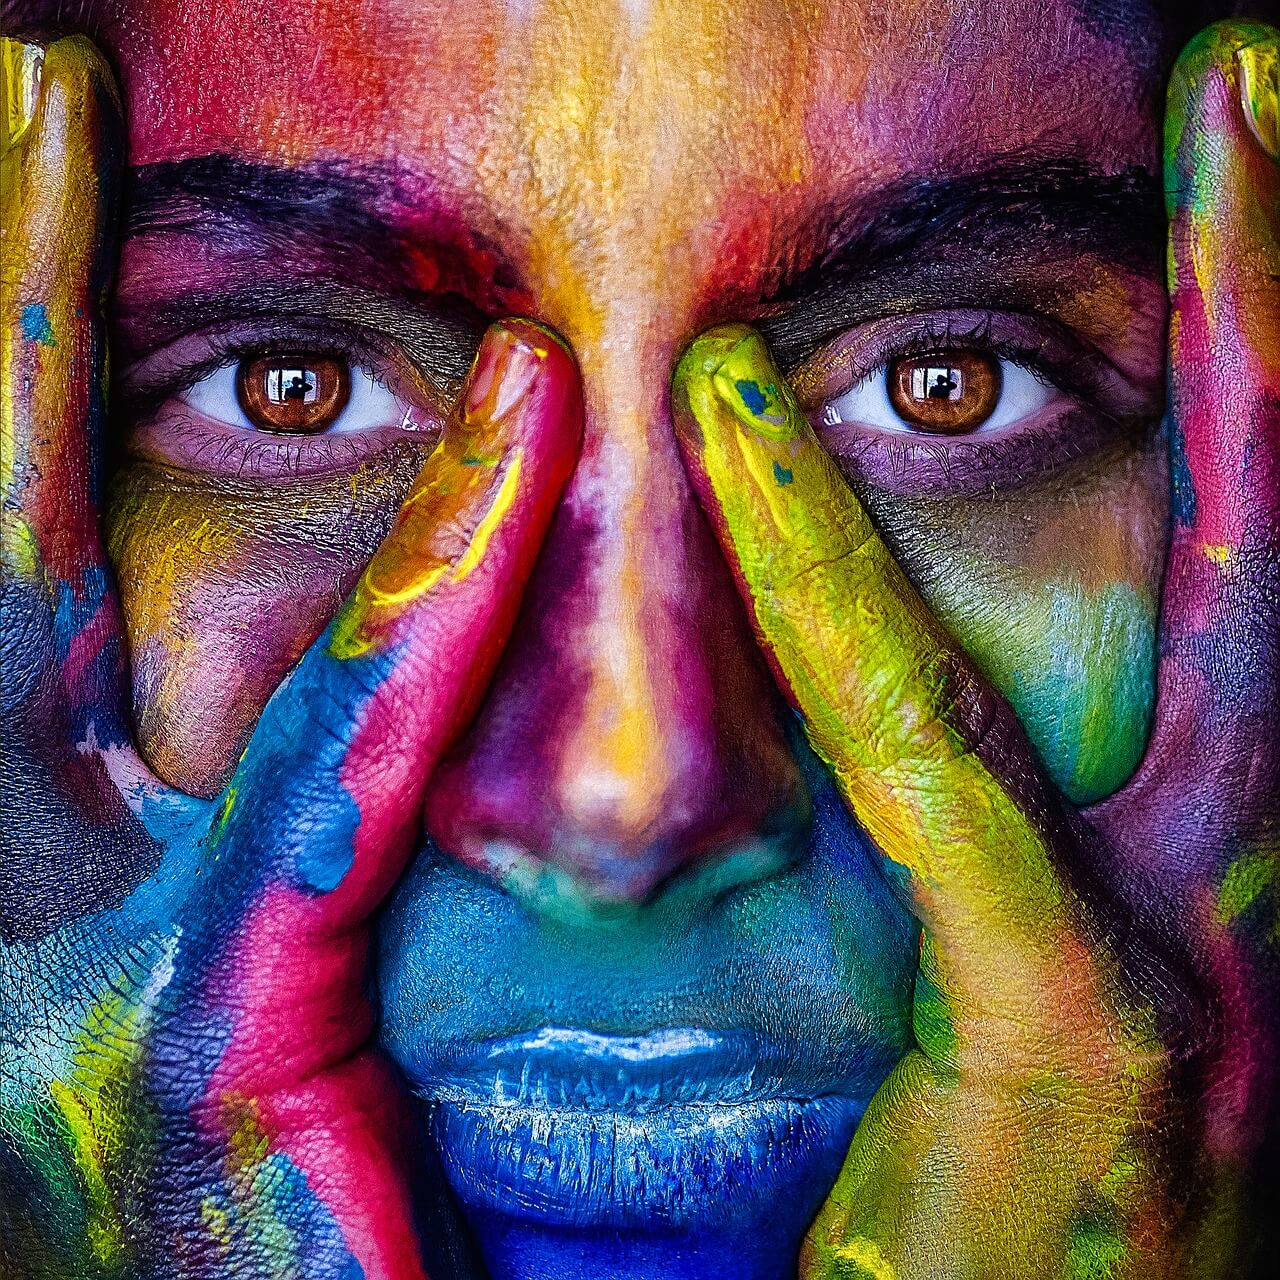 A close up of a person with colourful face paint